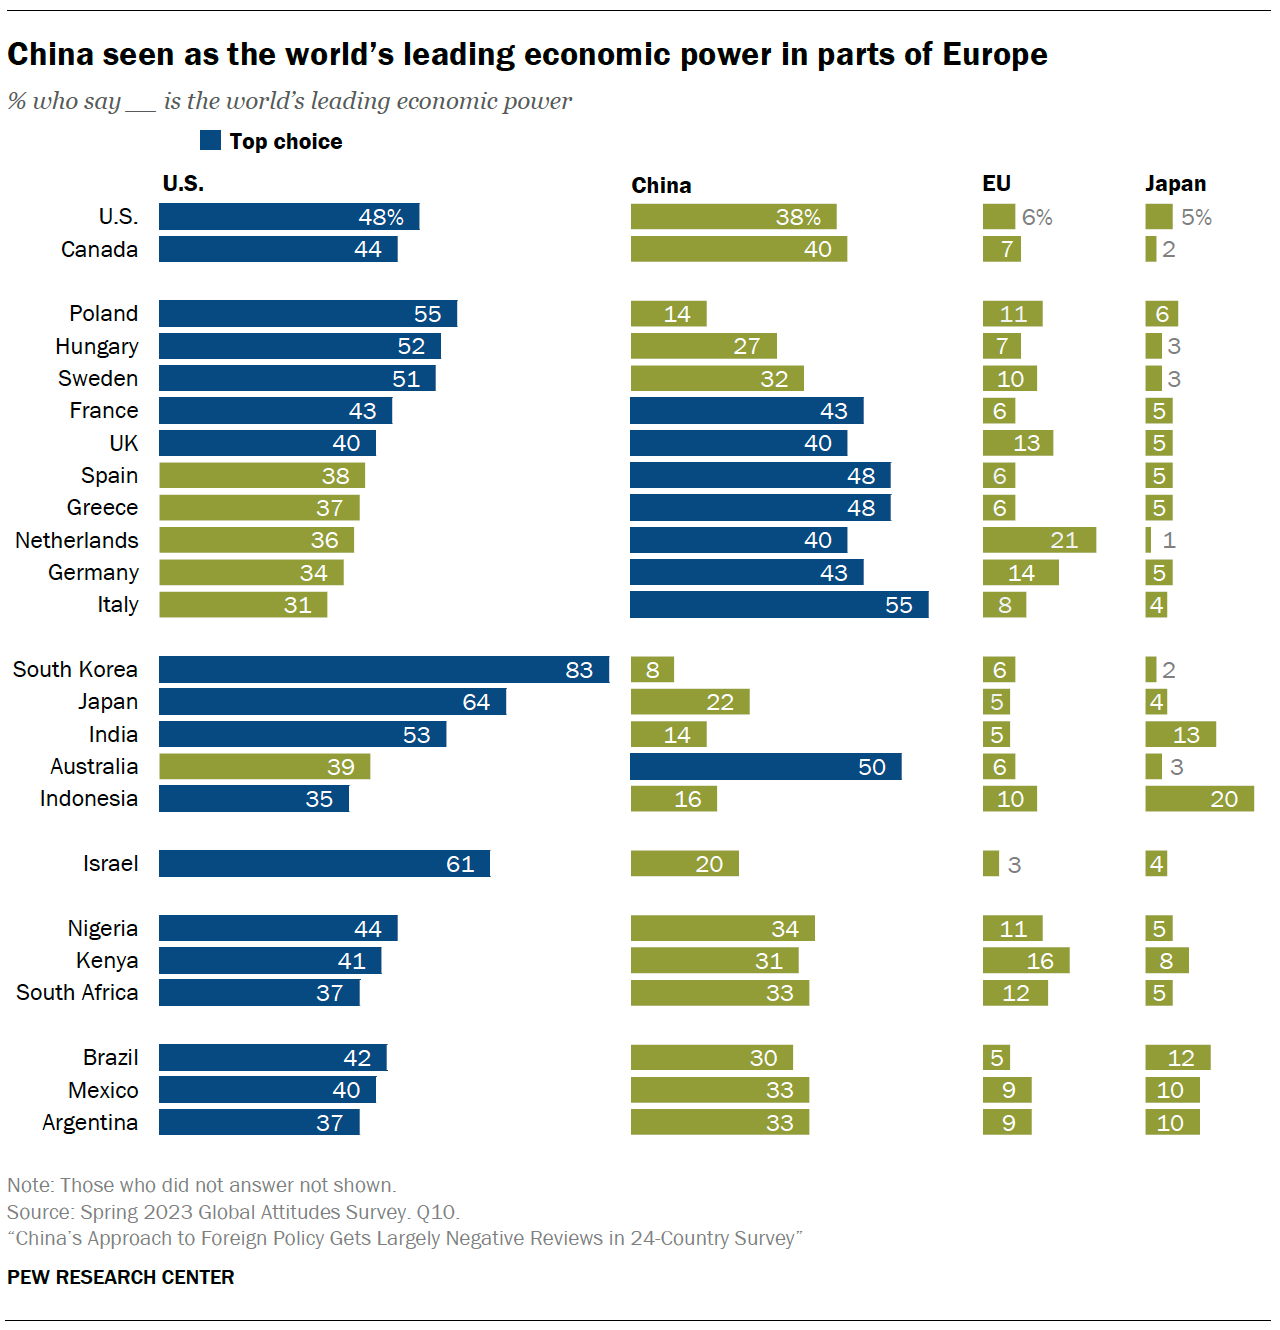 China seen as the world’s leading economic power in parts of Europe